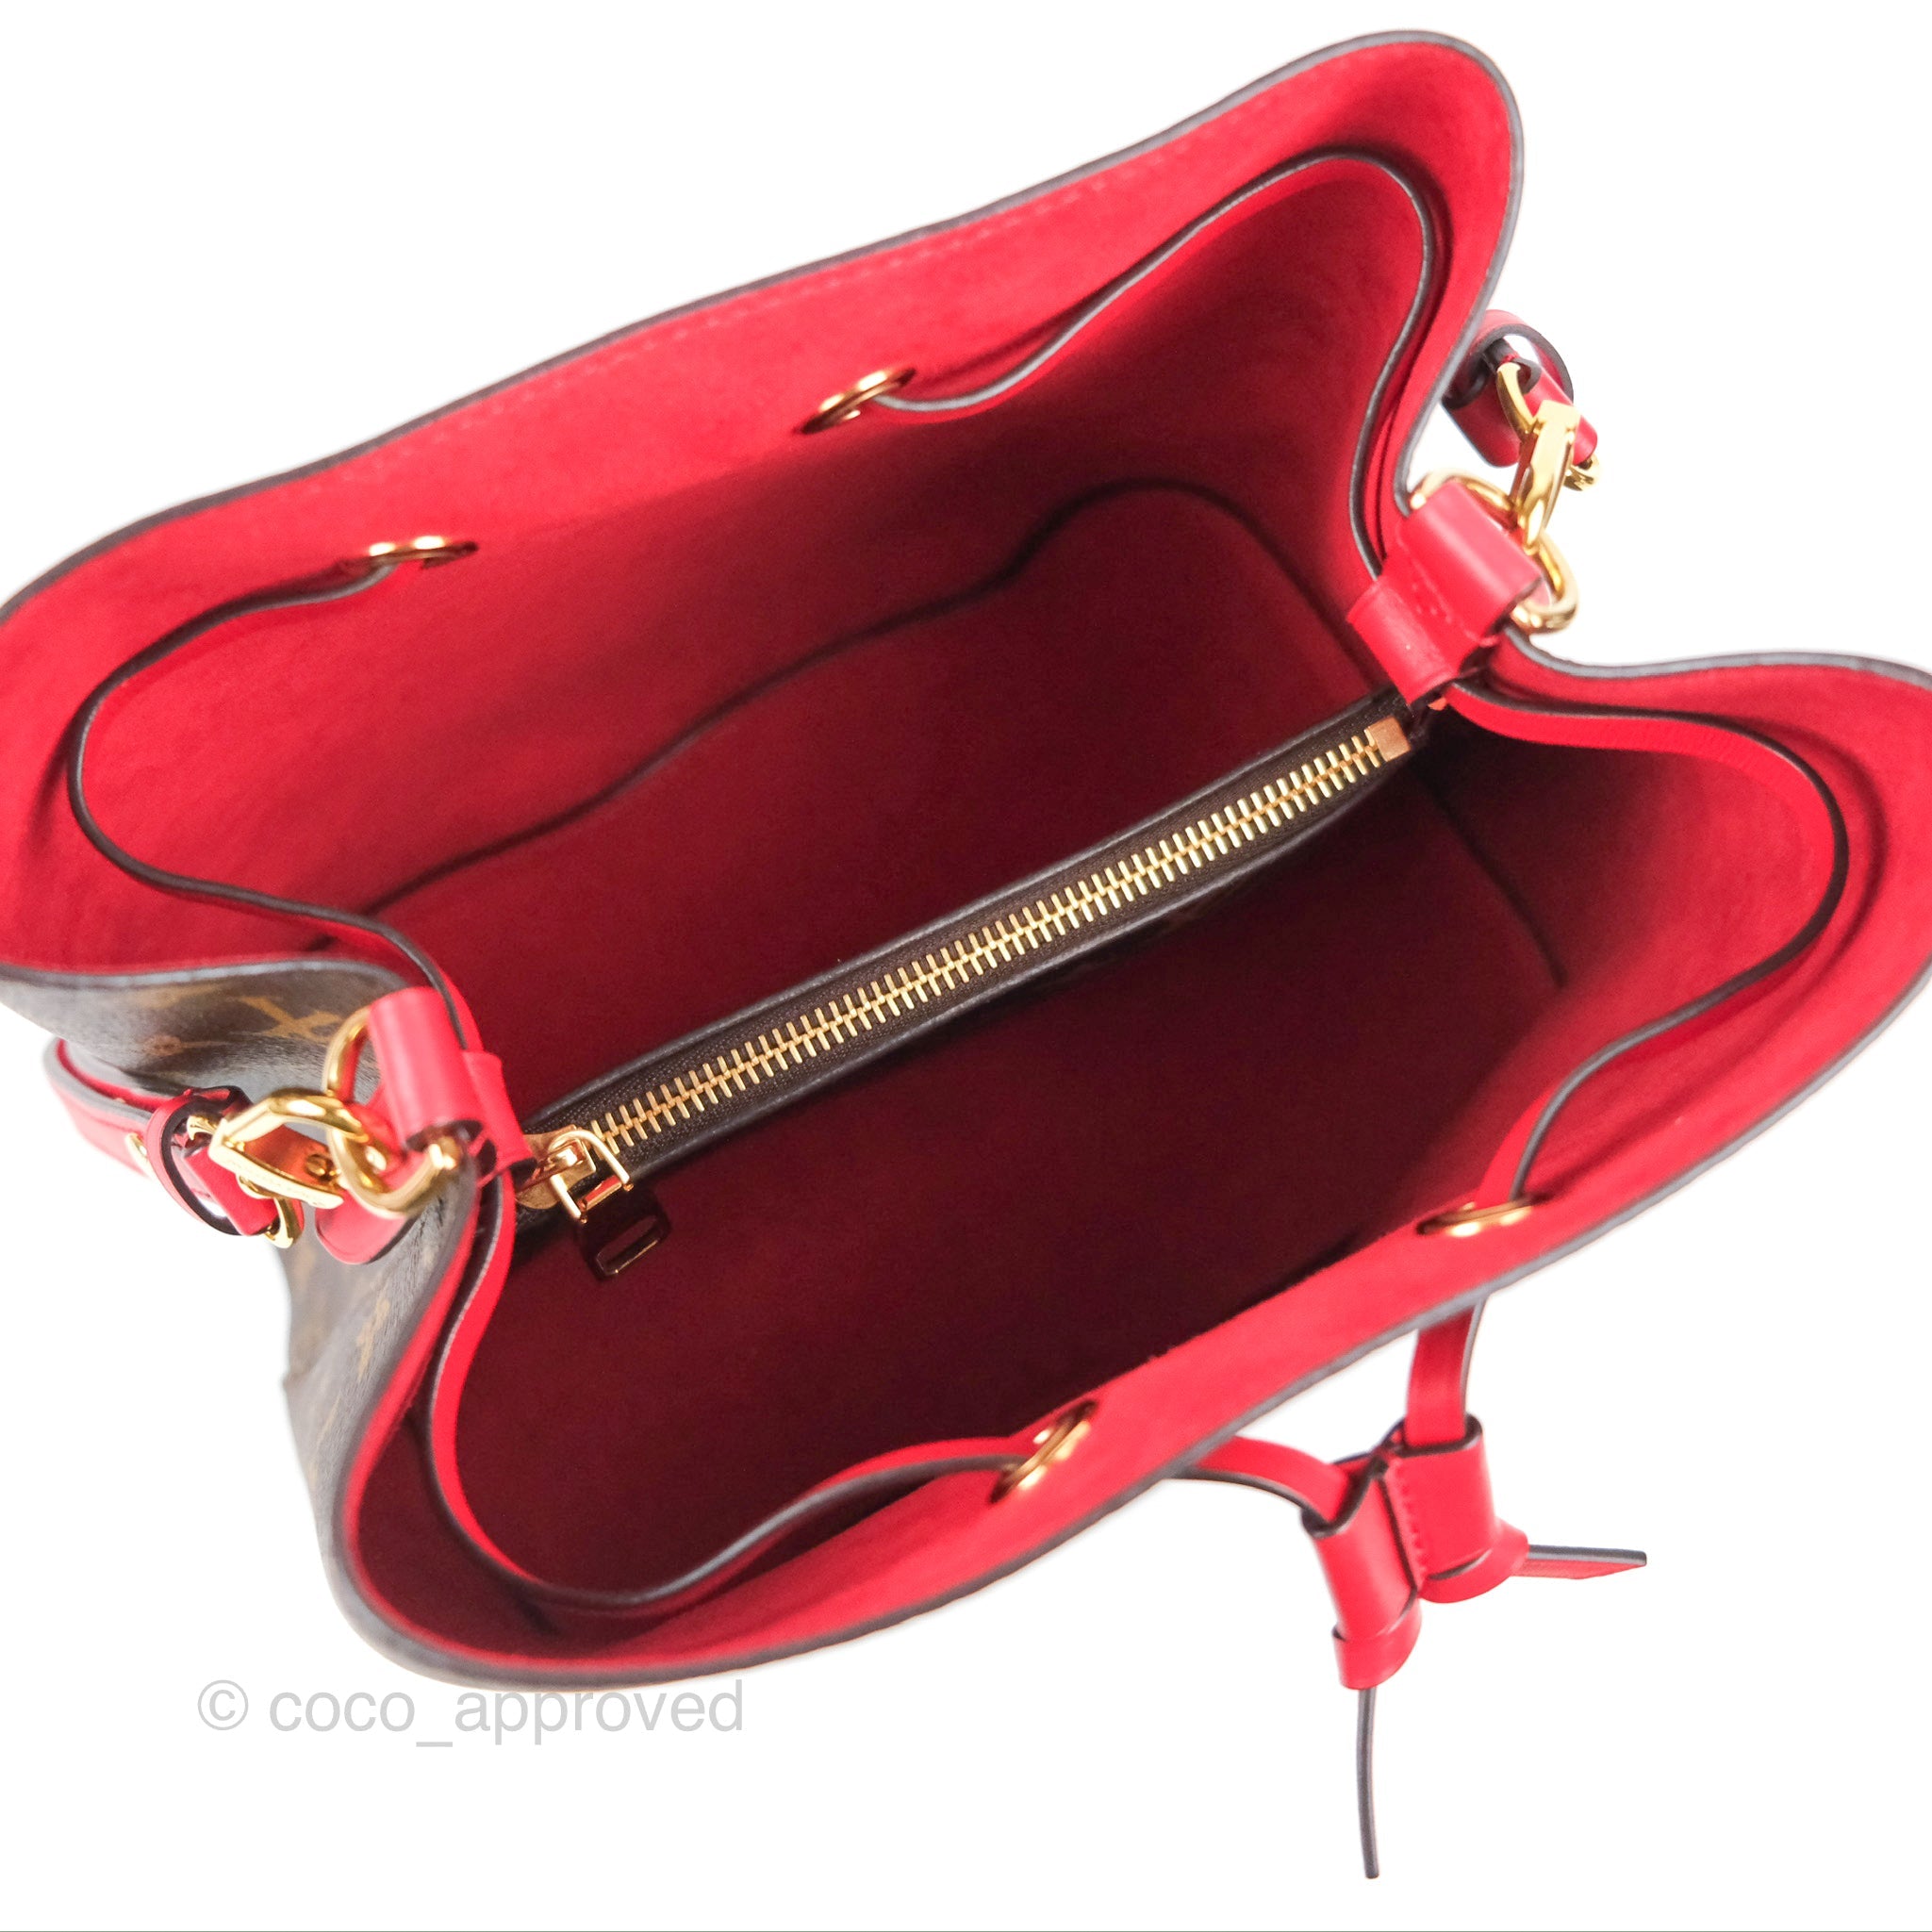 black louis vuitton purse with red inside